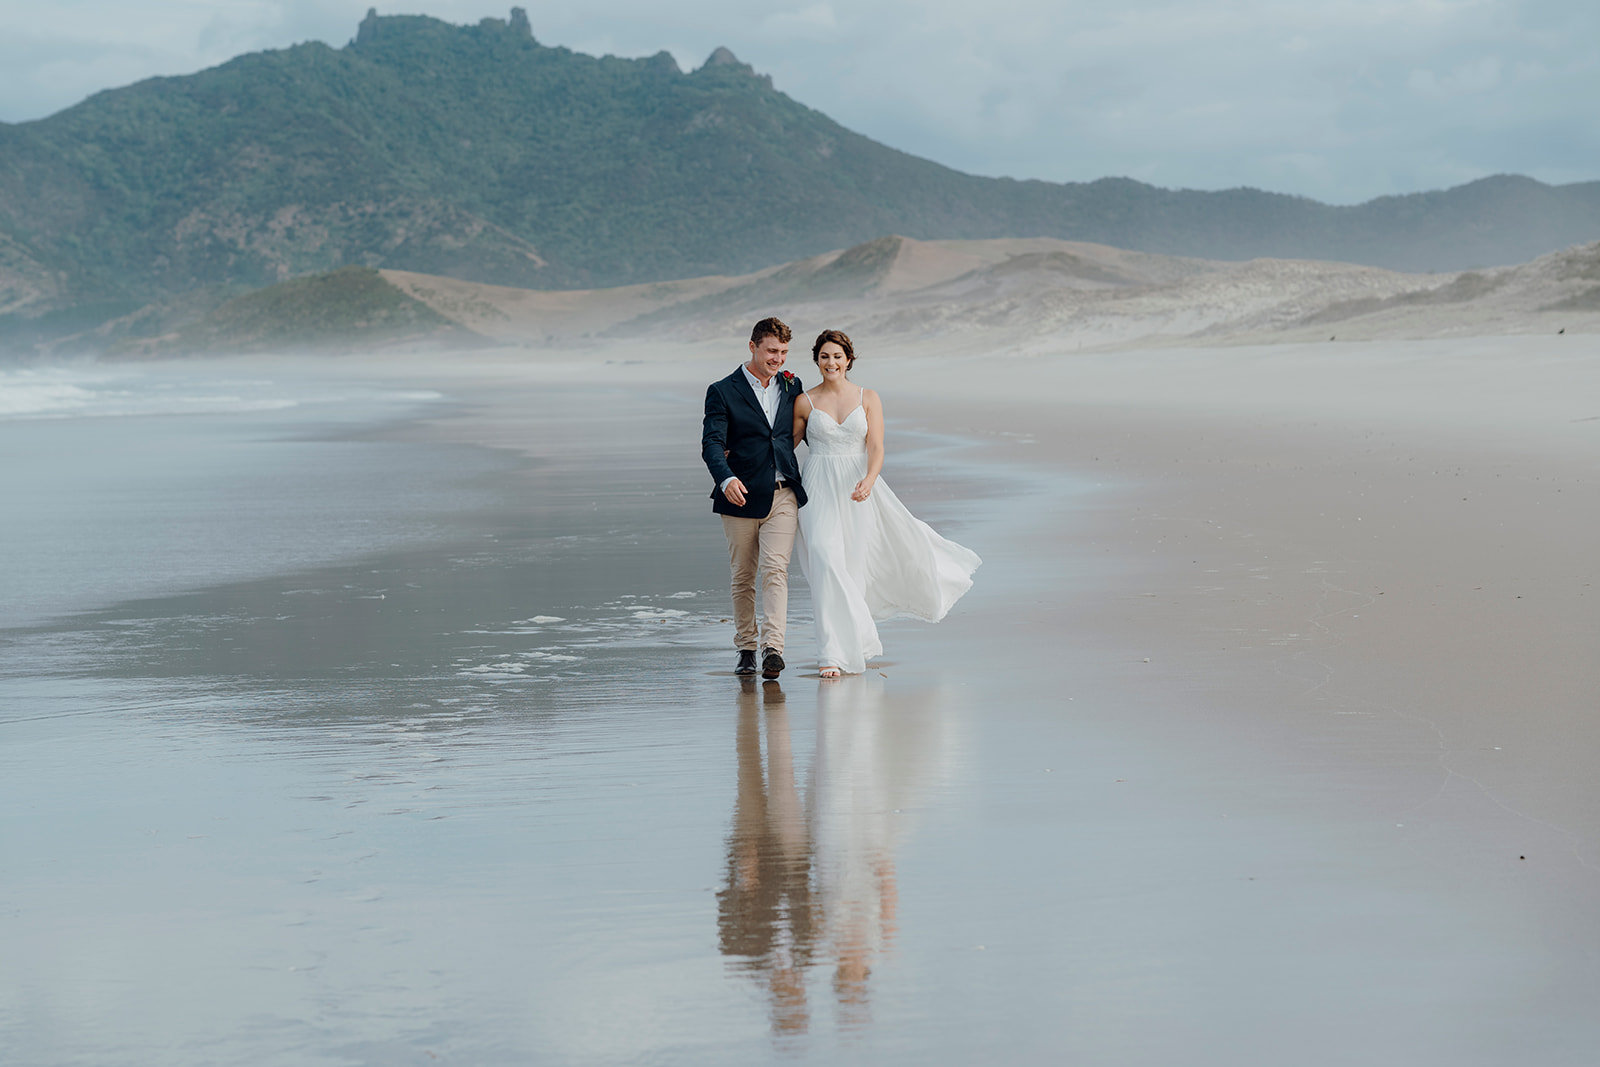 A bride and groom walking along a white sand beach with mountains in the background during their wedding photoshoot with Waikato Wedding Photographer Haley Adele Photography